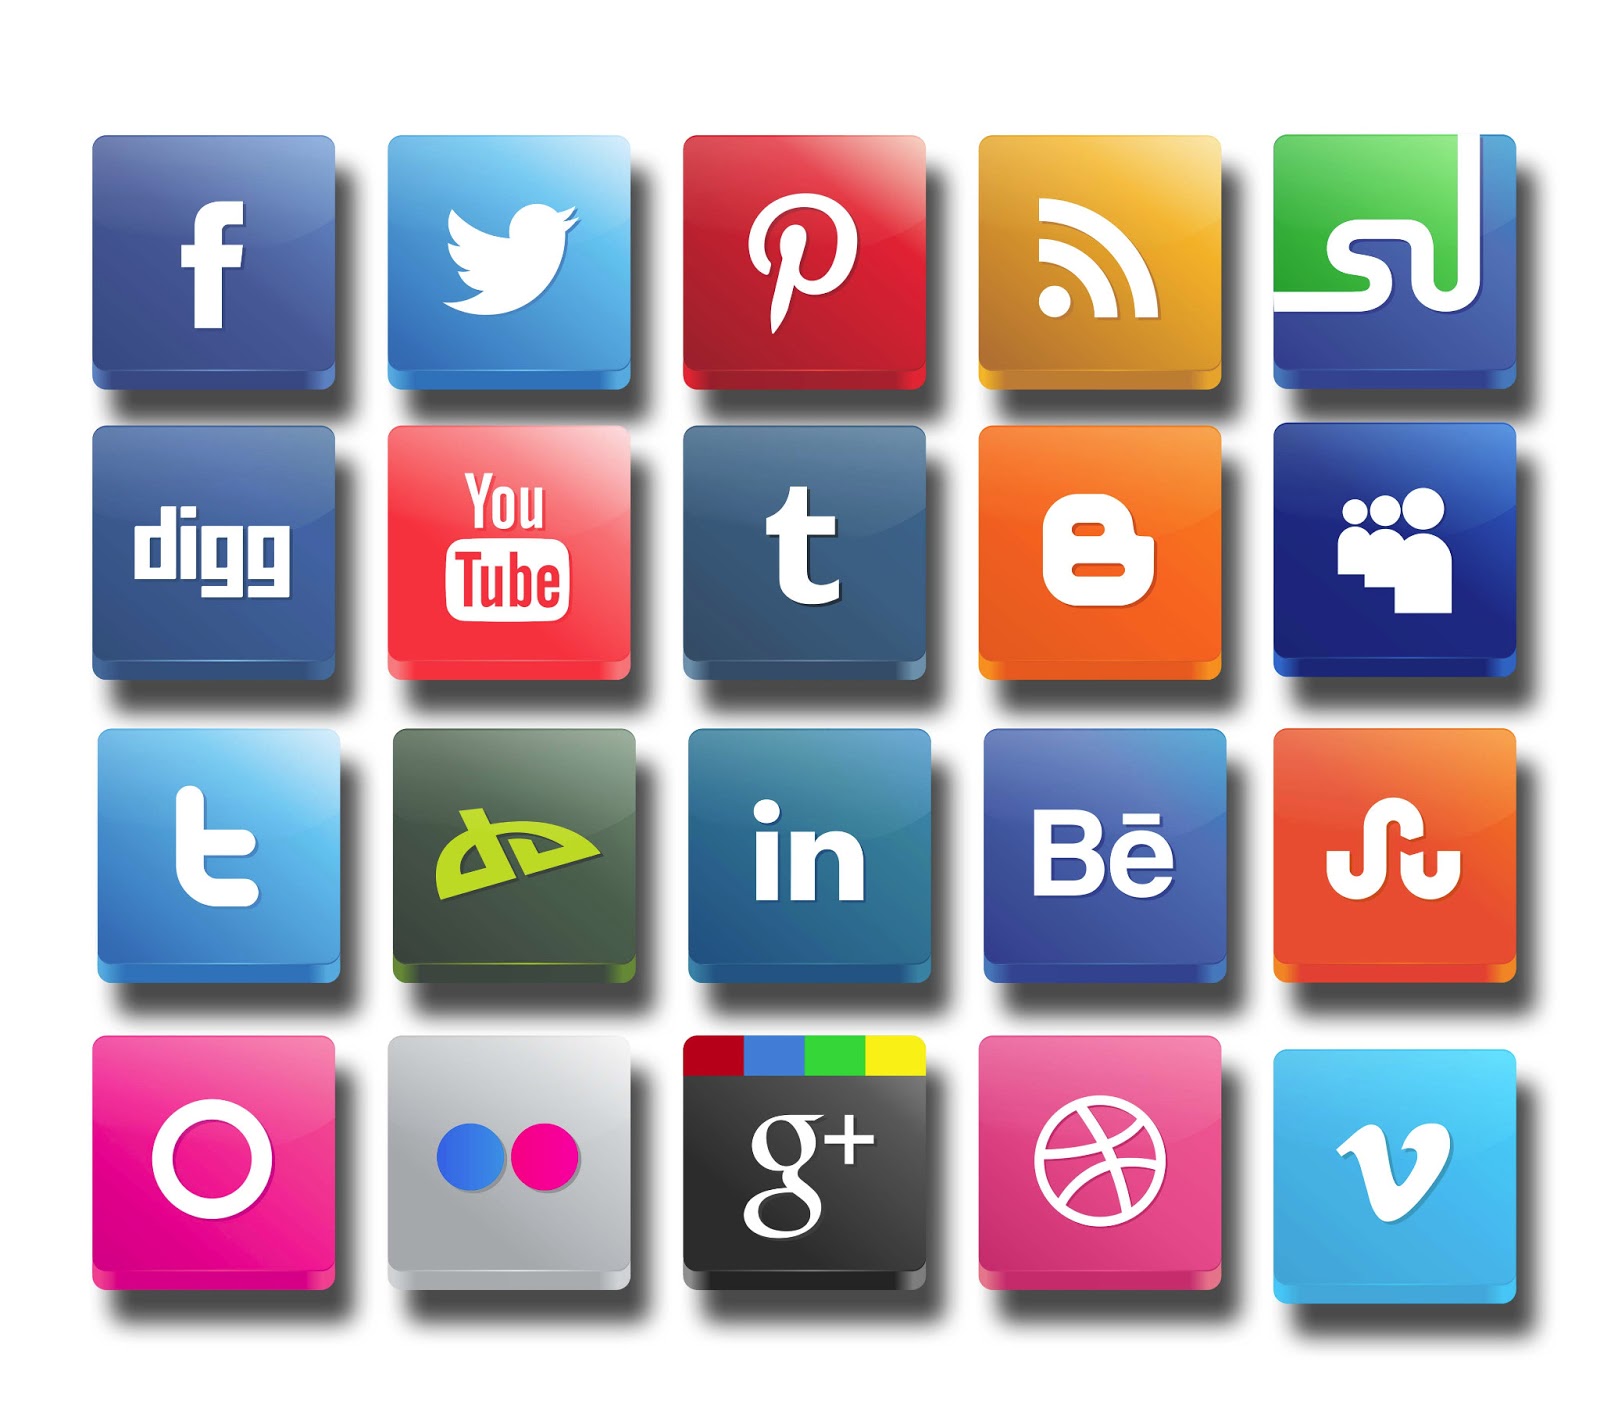 3d Vector Social Media Icon Must Be Used On A Website Design For Their